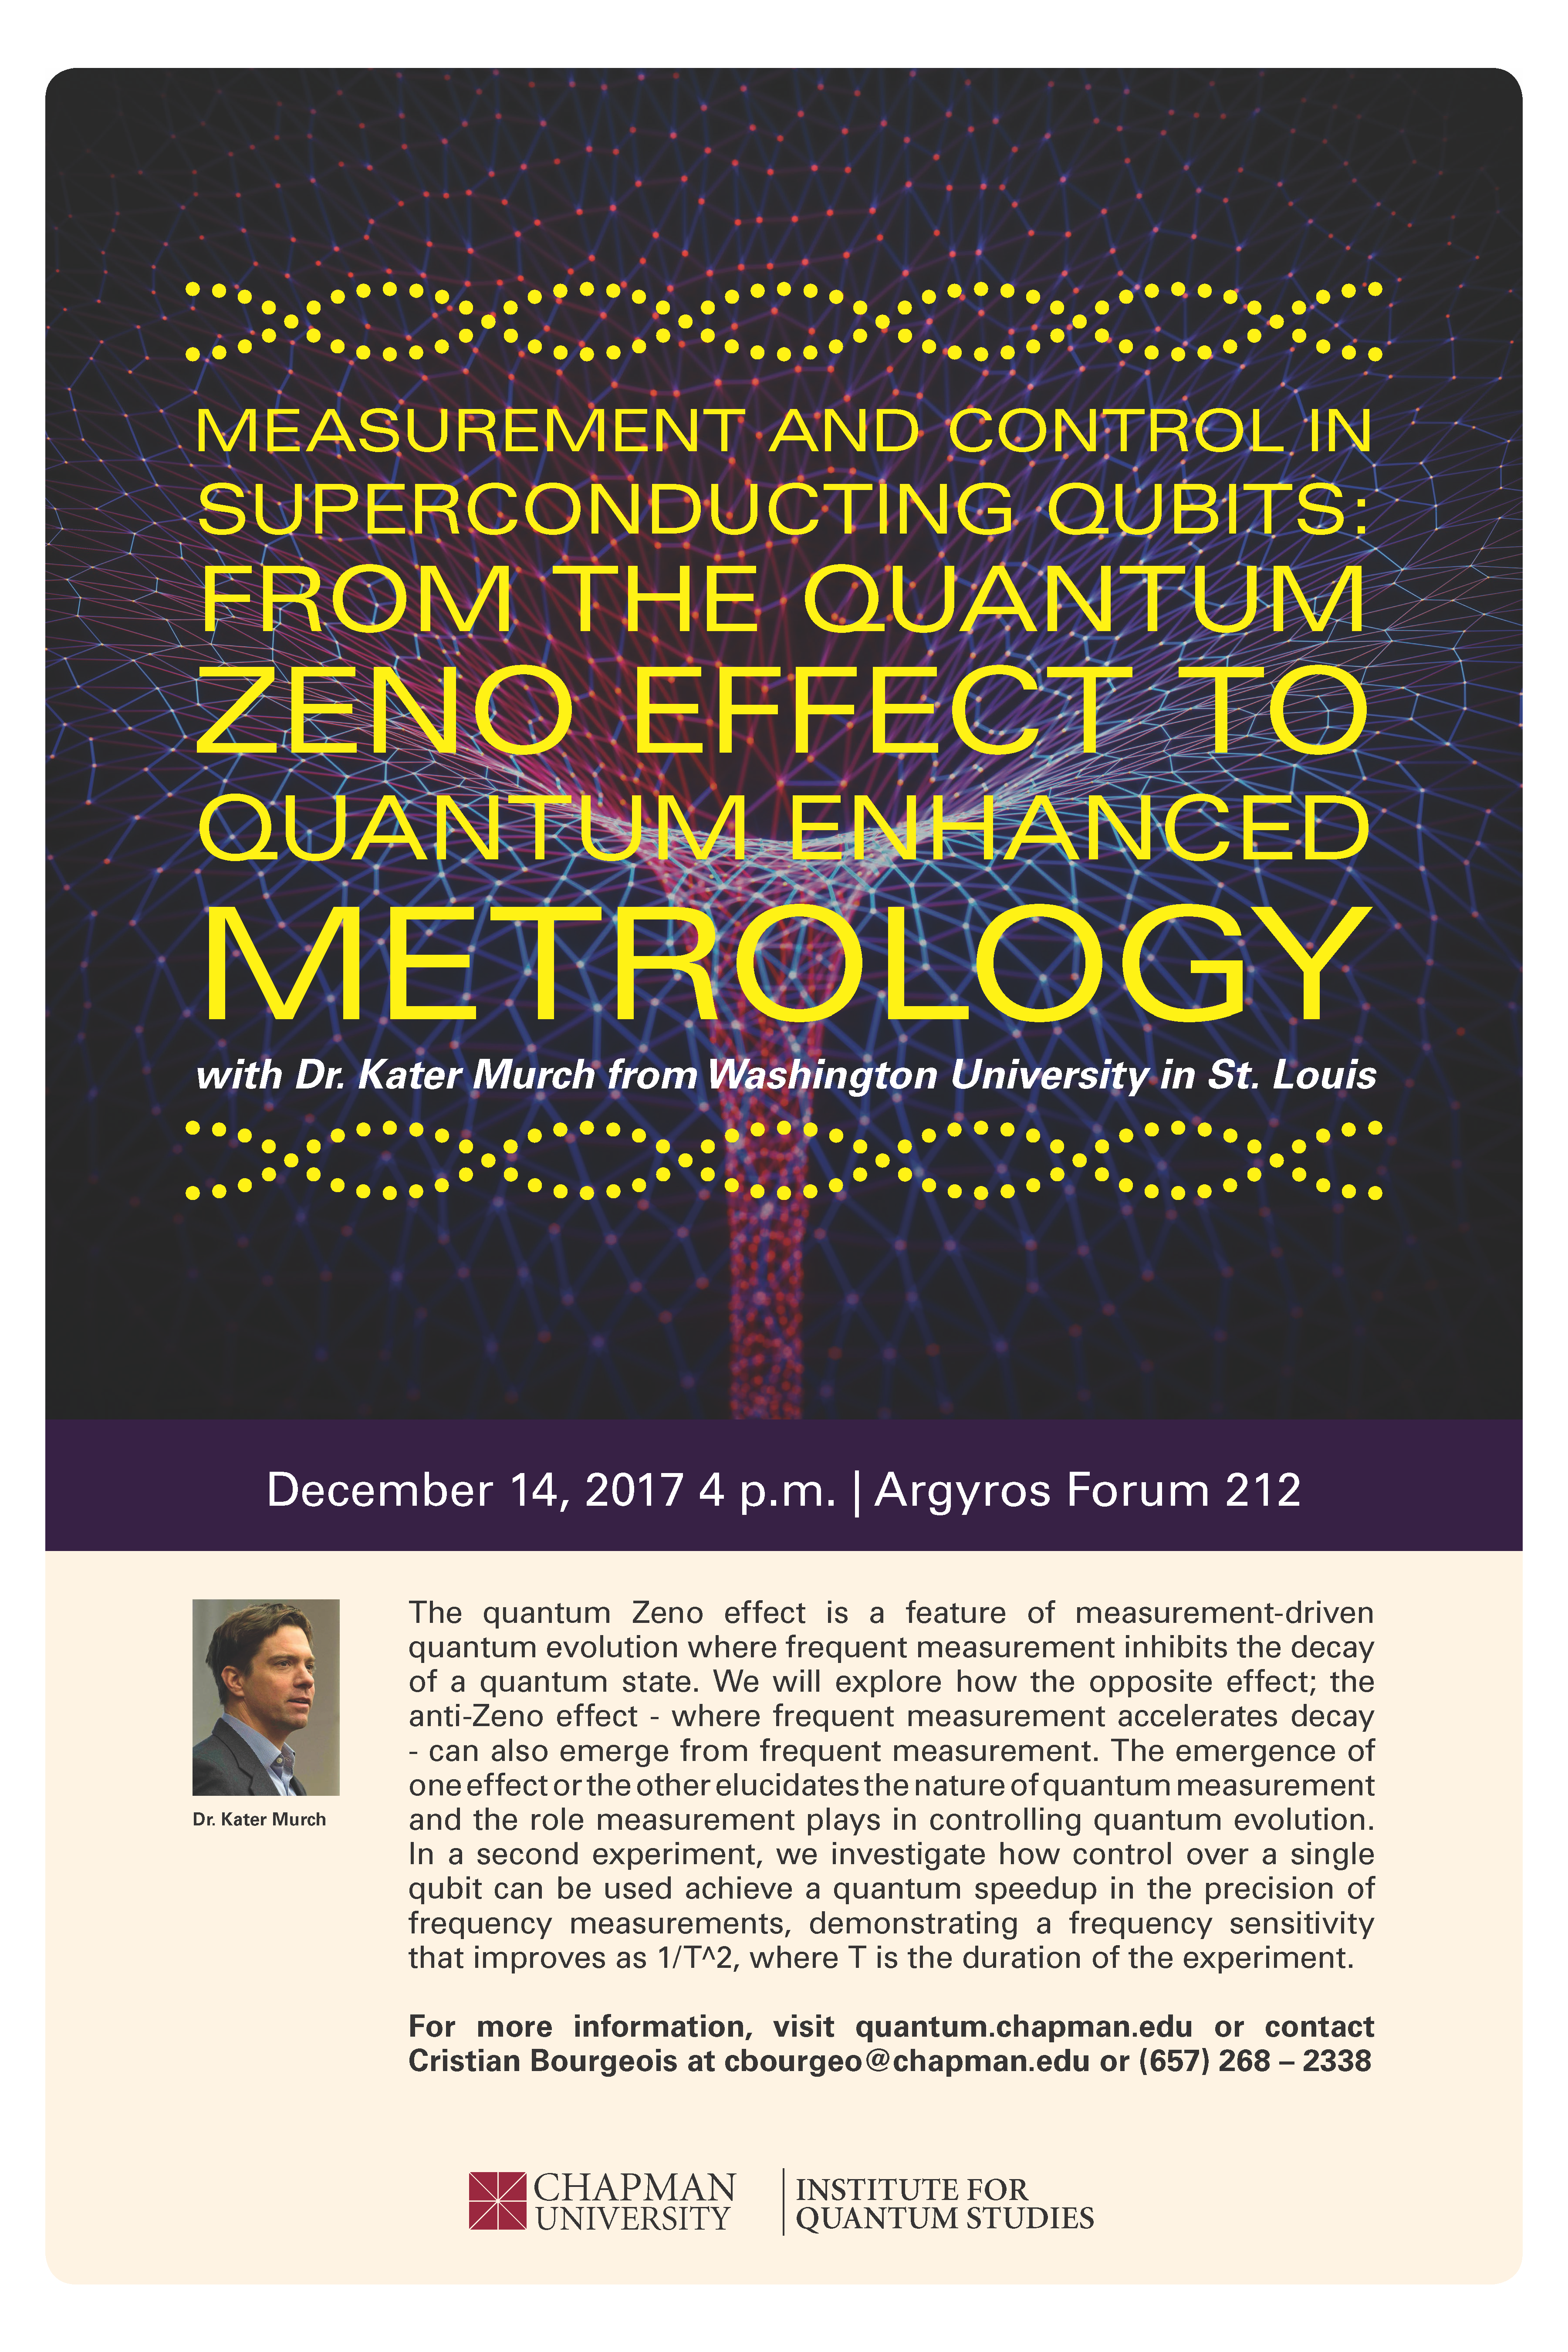 Poster of Dr. Kater Murch talk on the Quantum Zeno Effect